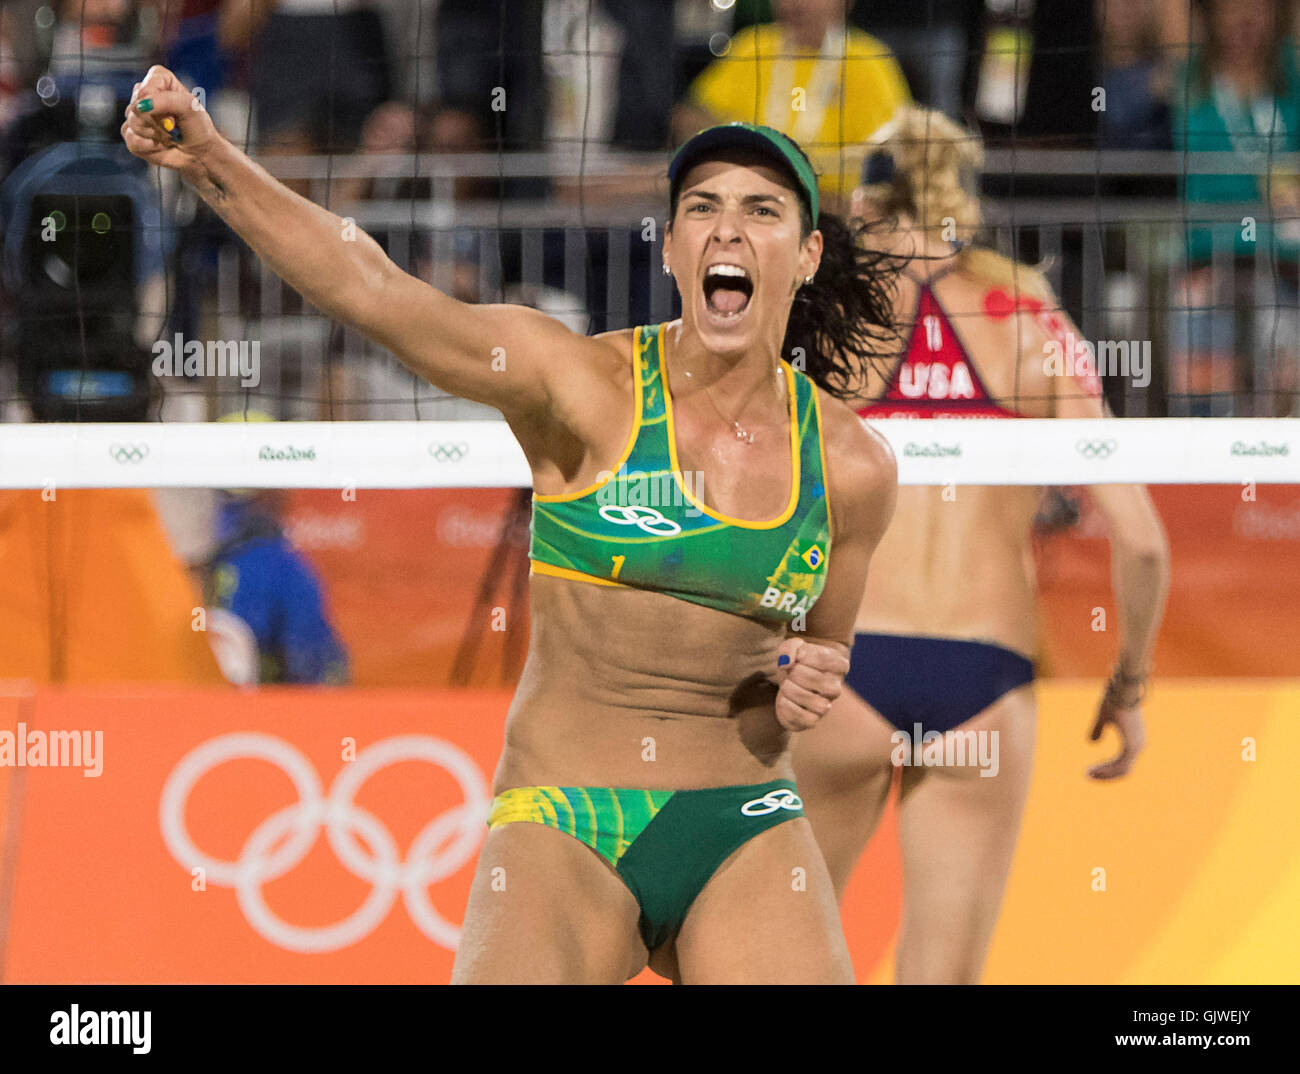 Rio de Janeiro, Brazil. 16th Aug, 2016. AGATHE RIPPEL BEDNARCZUK (BRA) reacts after she and Barbara Seixas de Freitas (BRA) beat Kerri Walsh Jennings (USA) and April Ross (USA) in the semifinals at Beach Volleyball Arena during the 2016 Rio Summer Olympics games. Credit:  Paul Kitagaki Jr./ZUMA Wire/Alamy Live News Stock Photo